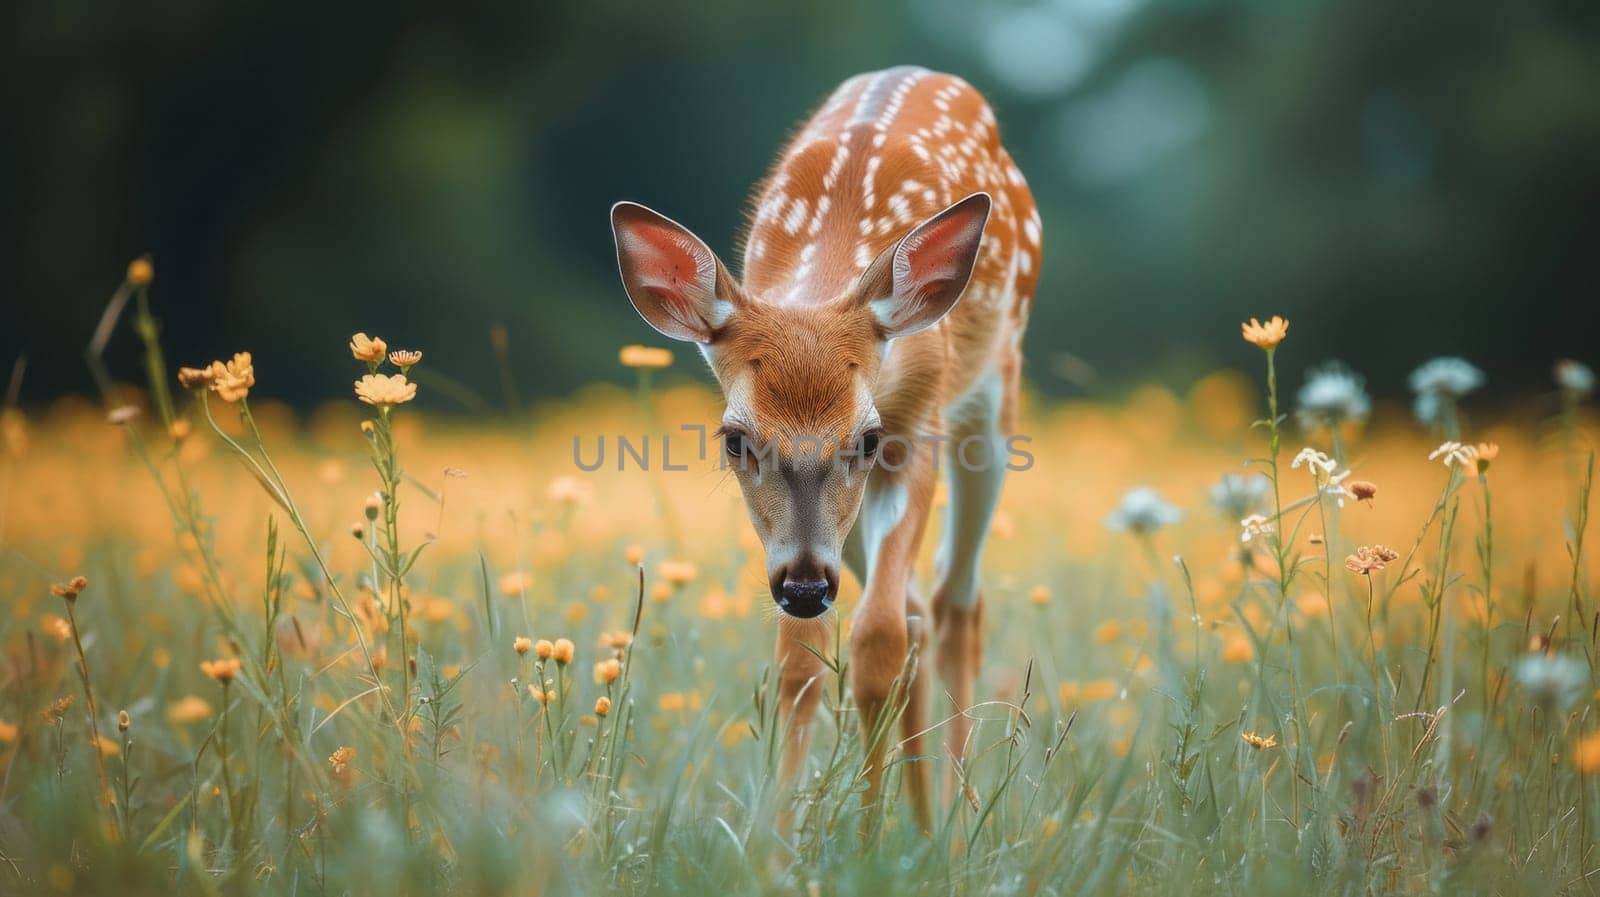 A small deer is standing in a field of yellow flowers, AI by starush